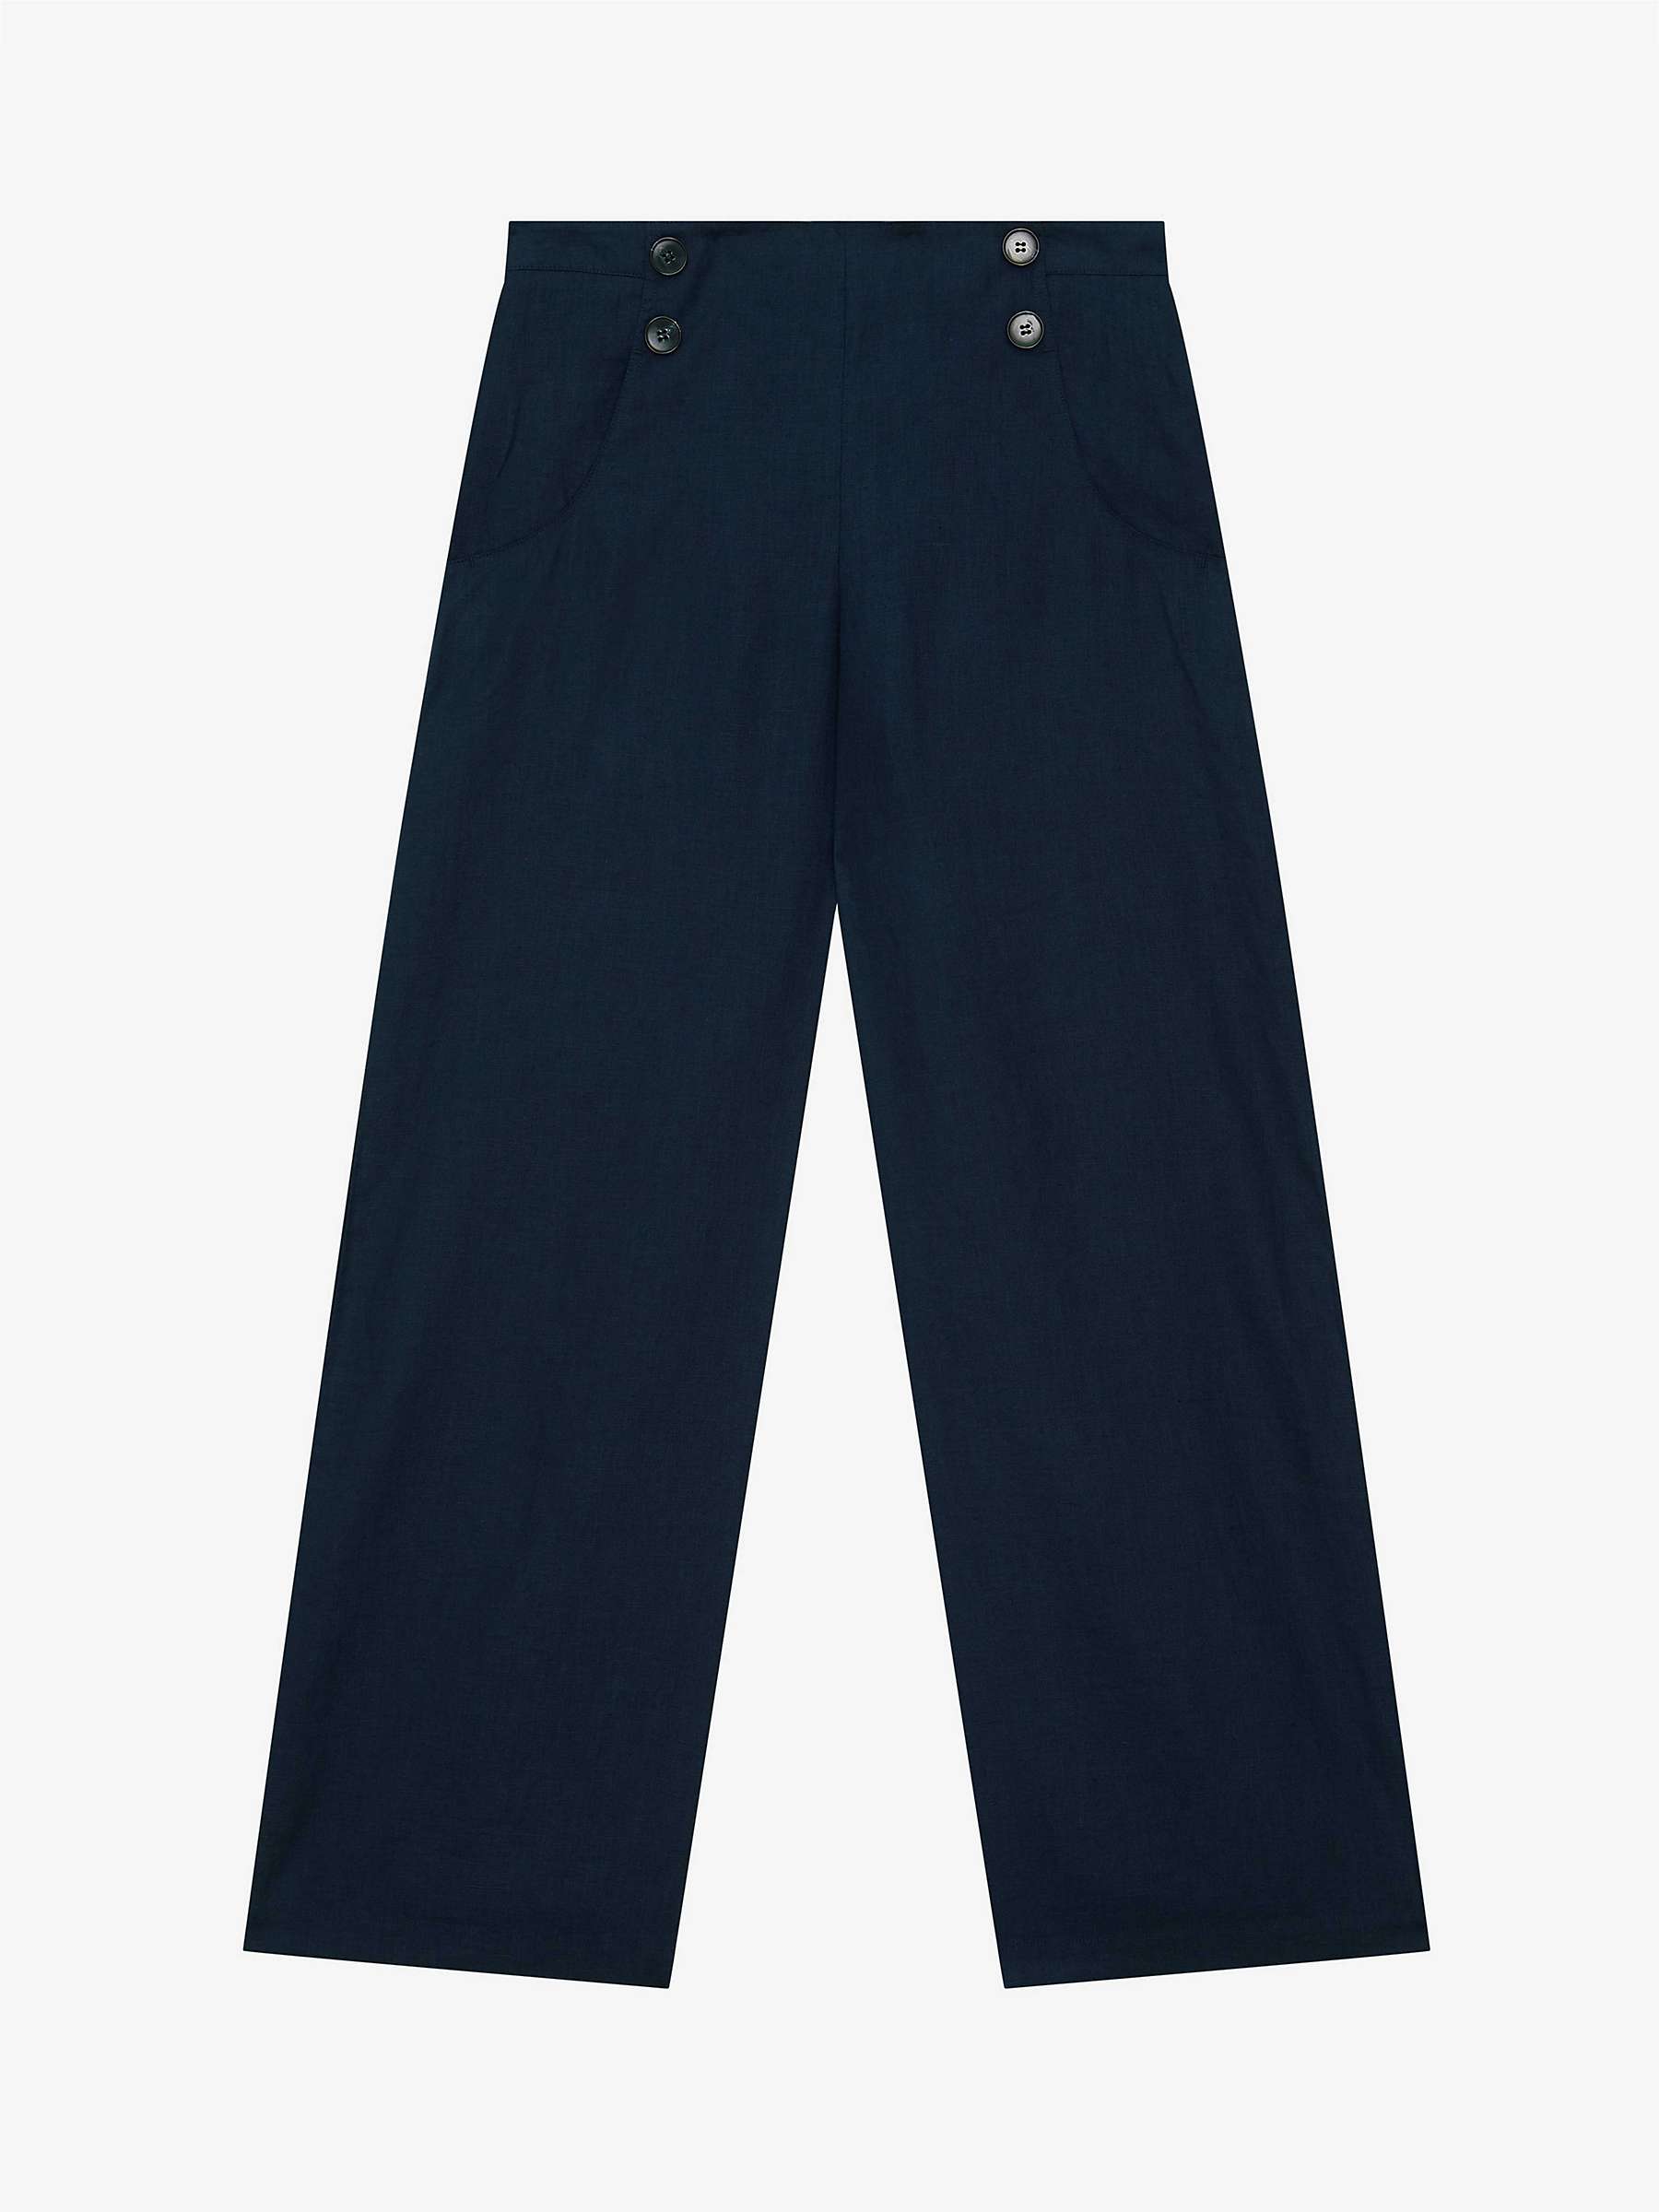 Buy Brora Linen Button Front Trousers, Navy Online at johnlewis.com